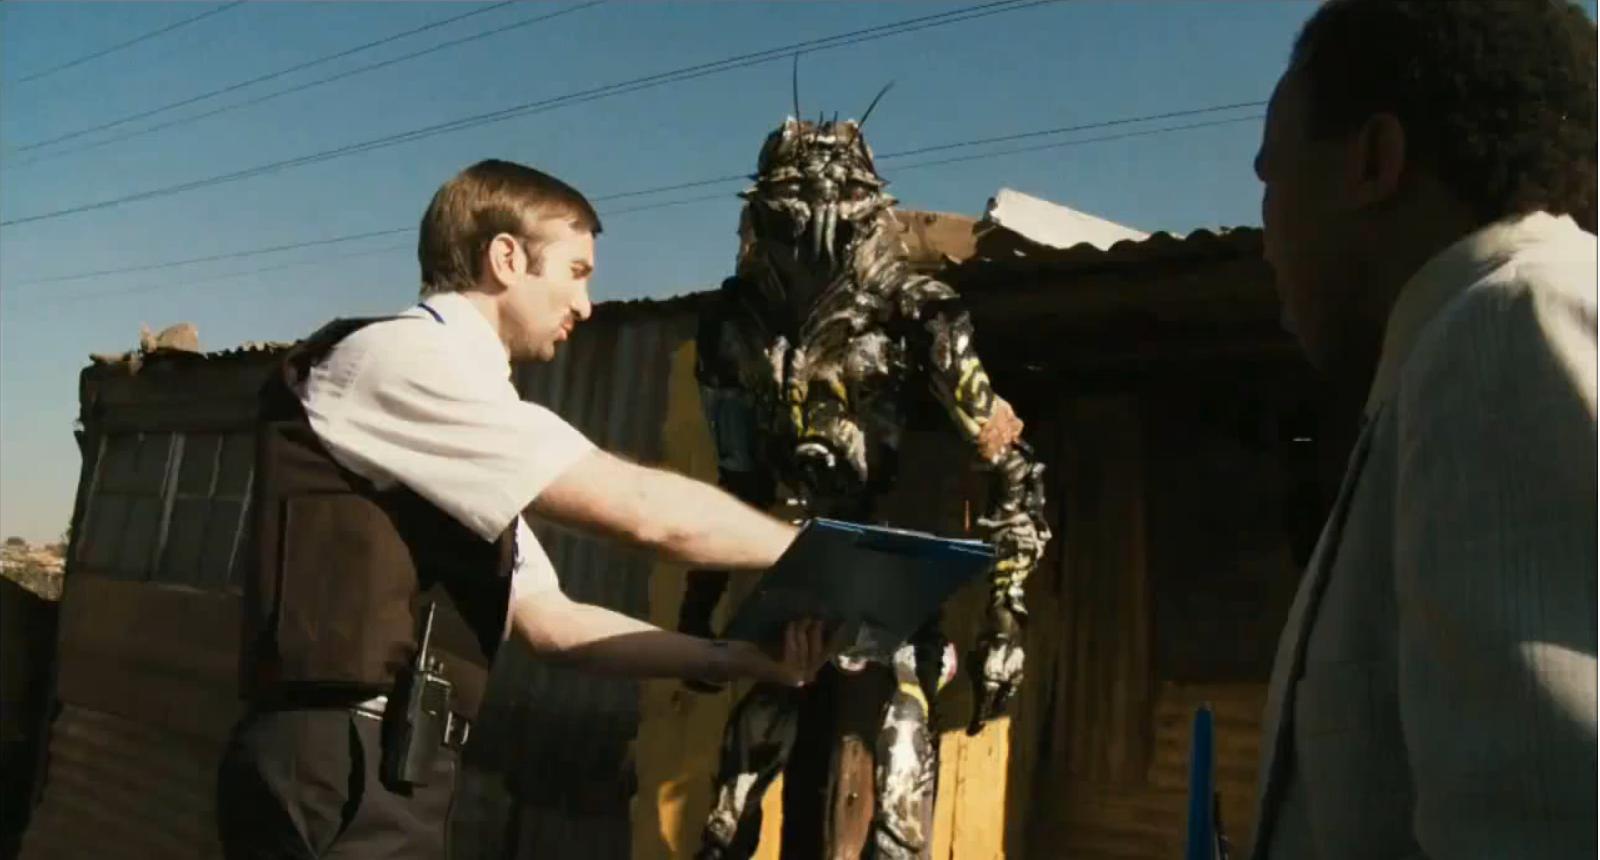 Wikus (Sharlto Copley) explains to one of the aliens that it's time to go.